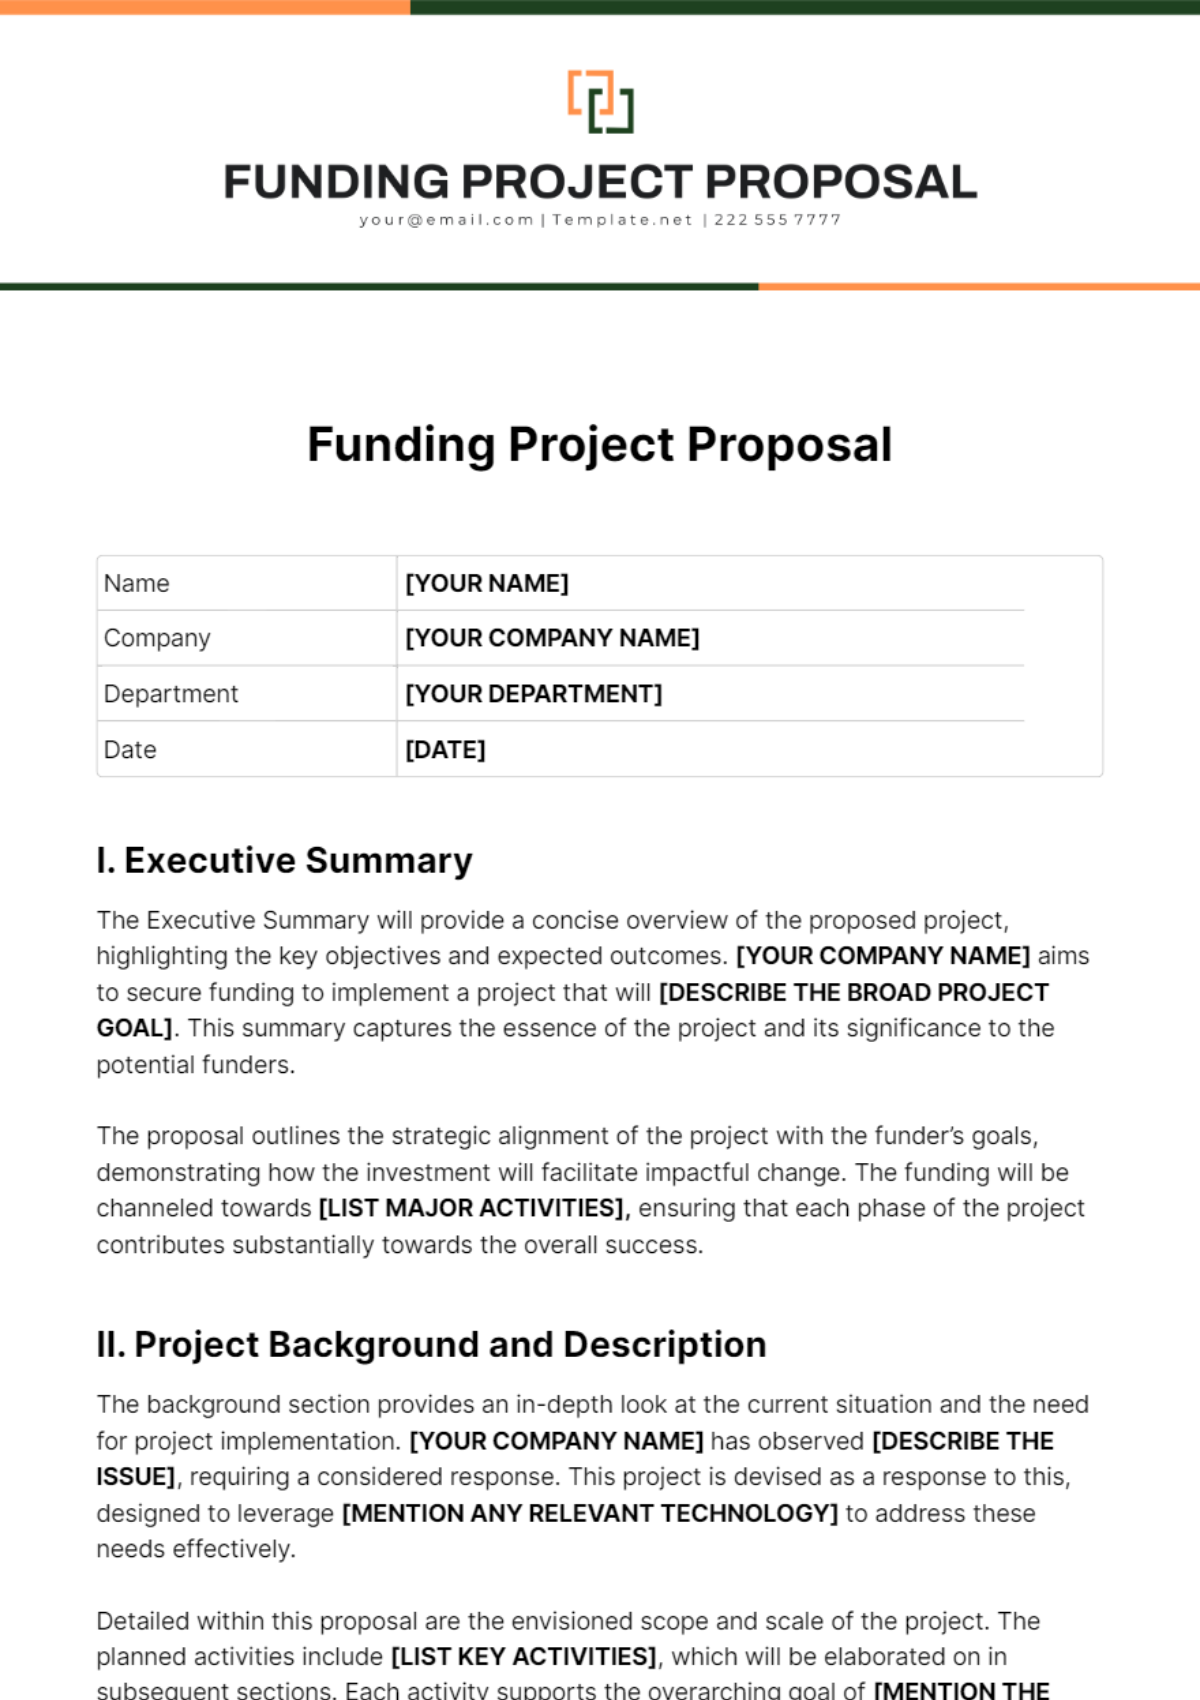 Free Funding Project Proposal Template